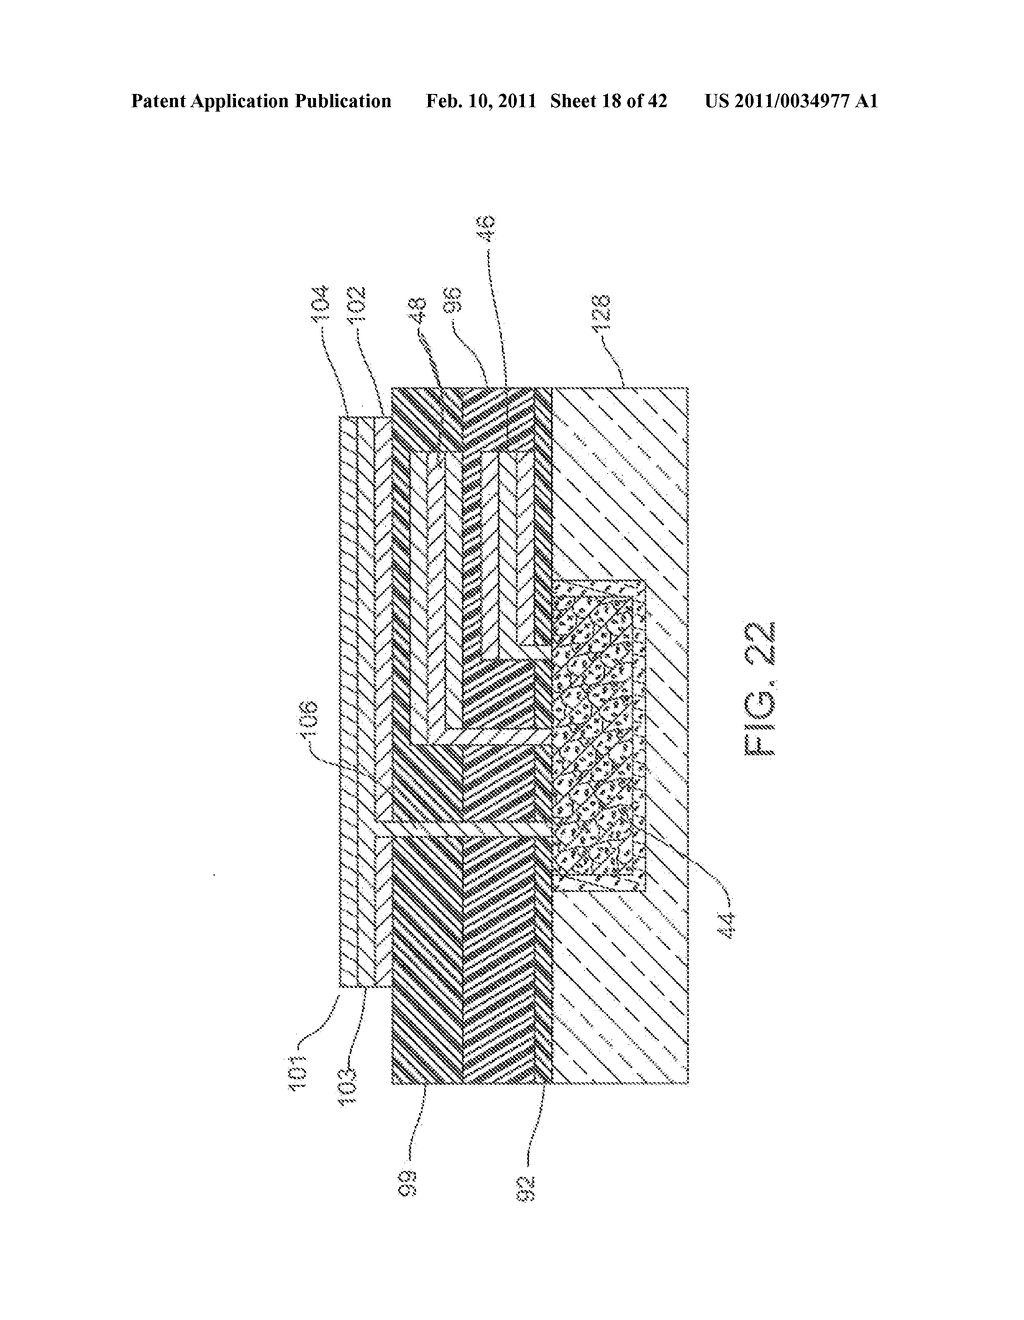 IMPLANTABLE ELECTRODE ARRAY ASSEMBLY INCLUDING A CARRIER FOR SUPPORTING THE ELECTRODES AND CONTROL MODULES FOR REGULATING OPERATION OF THE ELECTRODES EMBEDDED IN THE CARRIER, AND METHOD OF MAKING SAME - diagram, schematic, and image 19